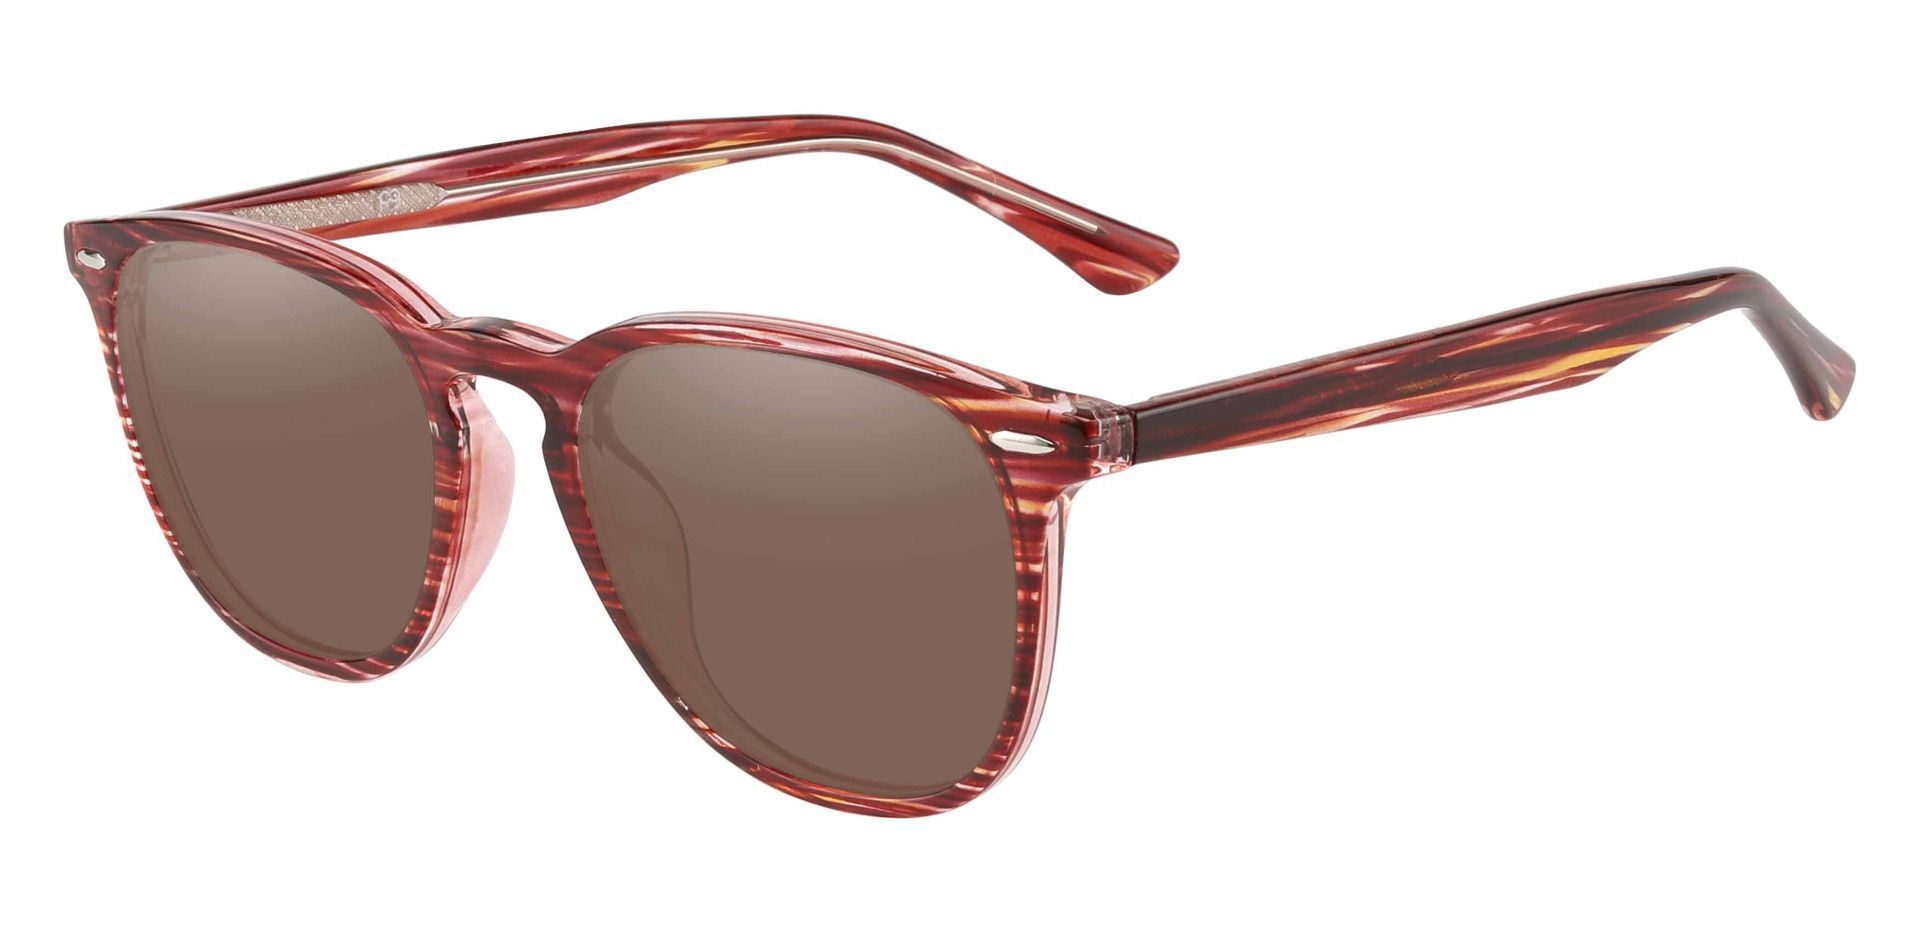 Sycamore Oval Reading Sunglasses - Red Frame With Brown Lenses